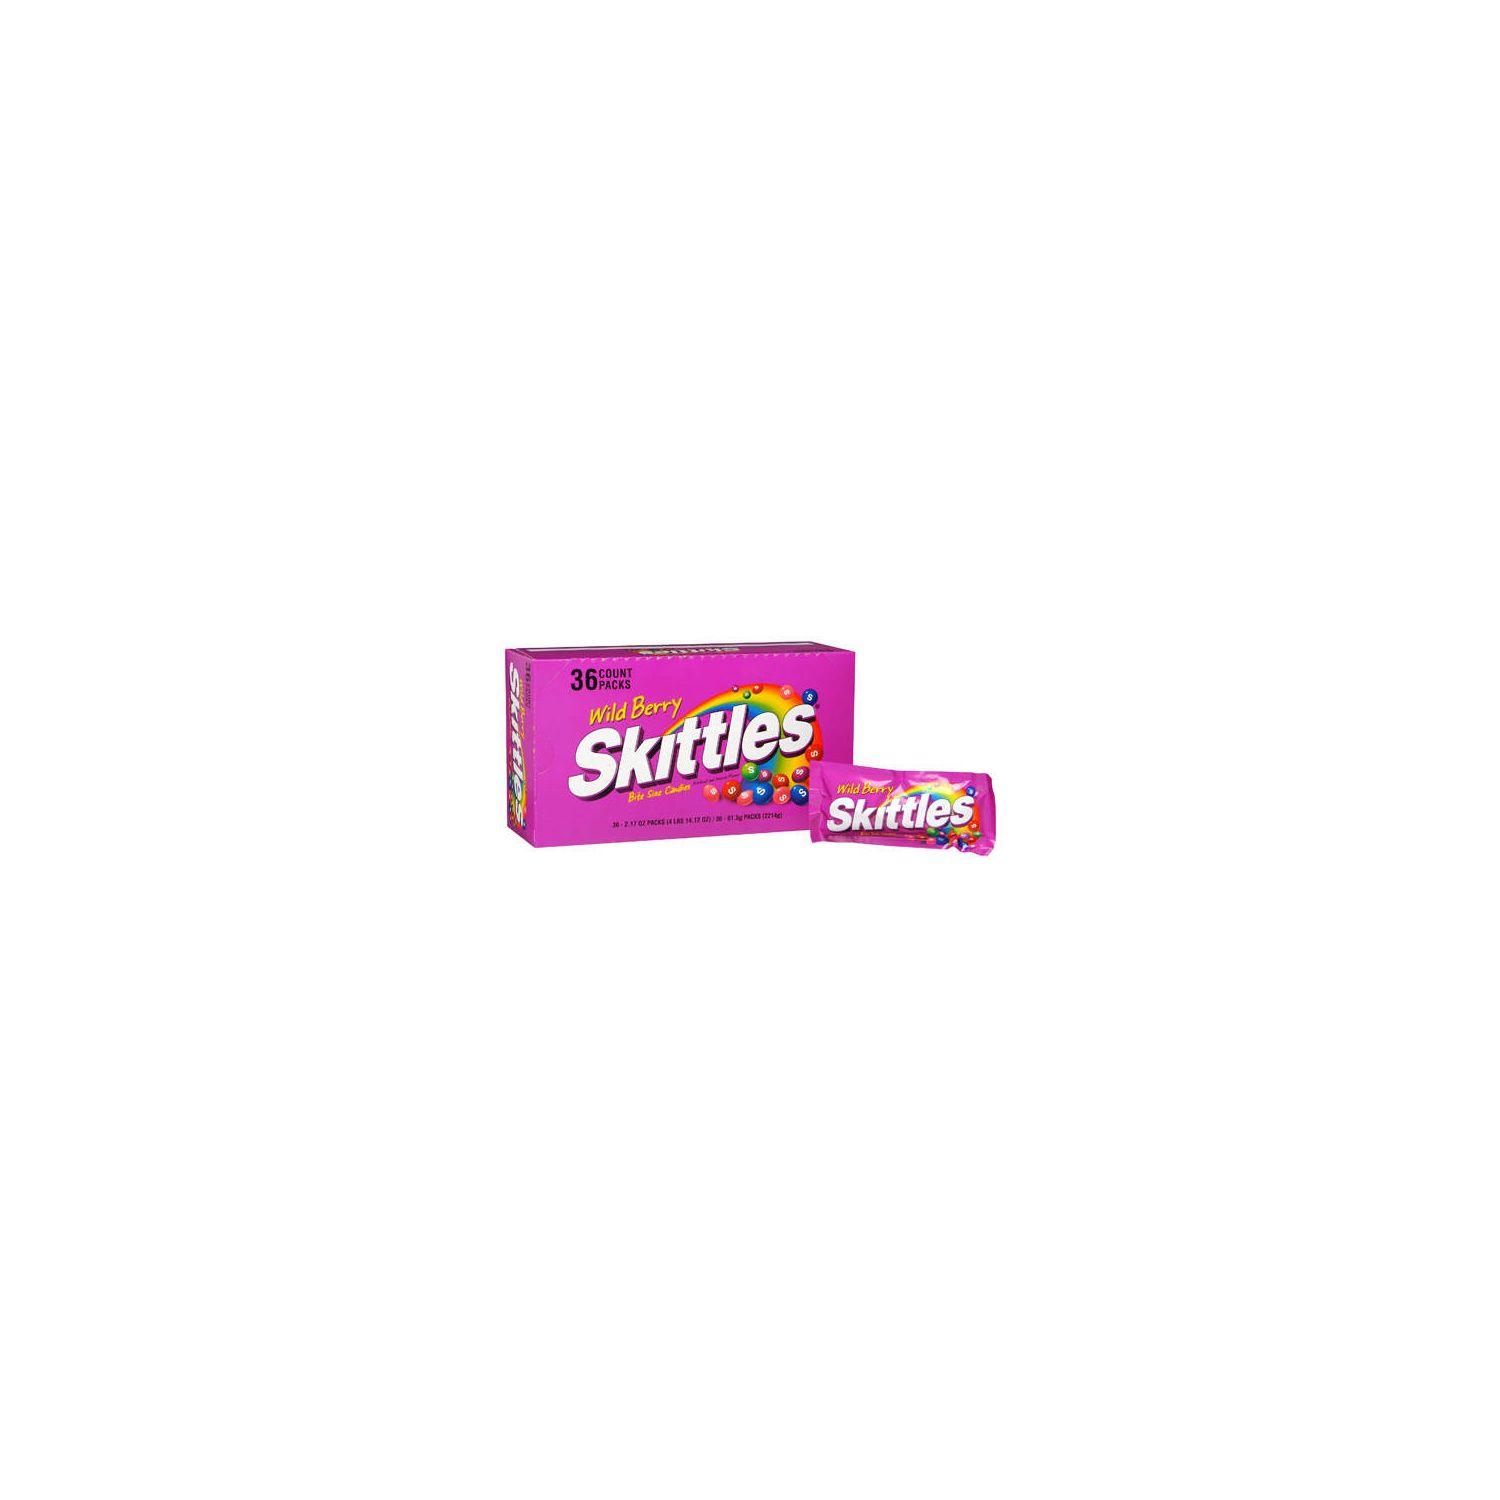 Skittles Wild Berry Skittles Candy - 36 / 2.17 Ounce bags